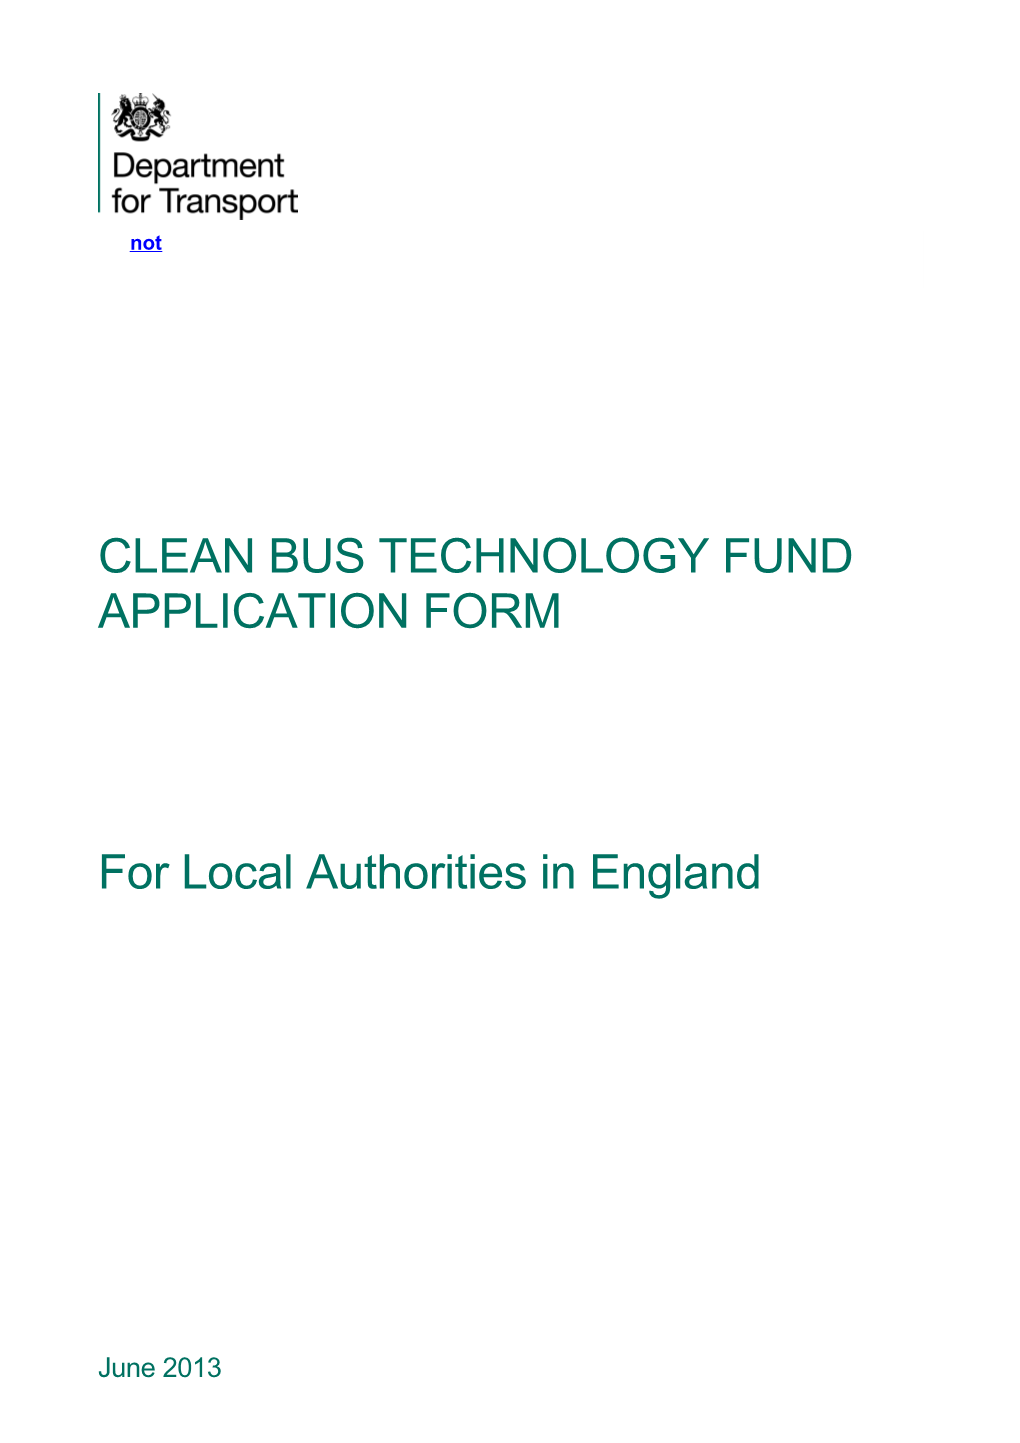 Green Bus Technology Fund Application Form